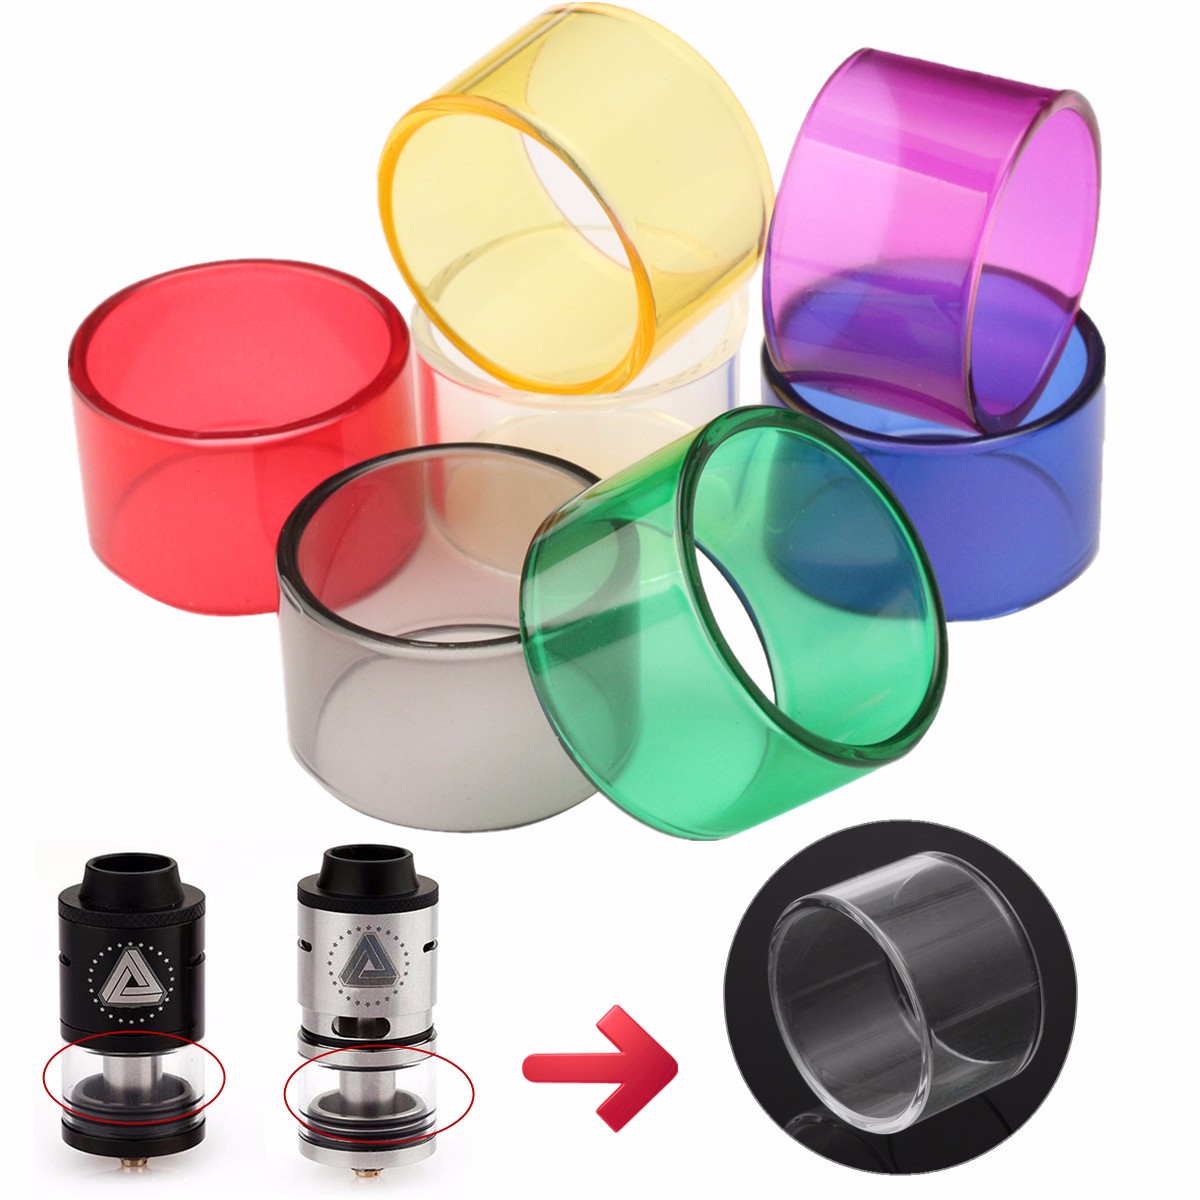 Replacement-Transparent-Pyrex-Glass-Tube-Cap-Tank-24mm-for-Limitless-RDTA-7-Colors-1190027